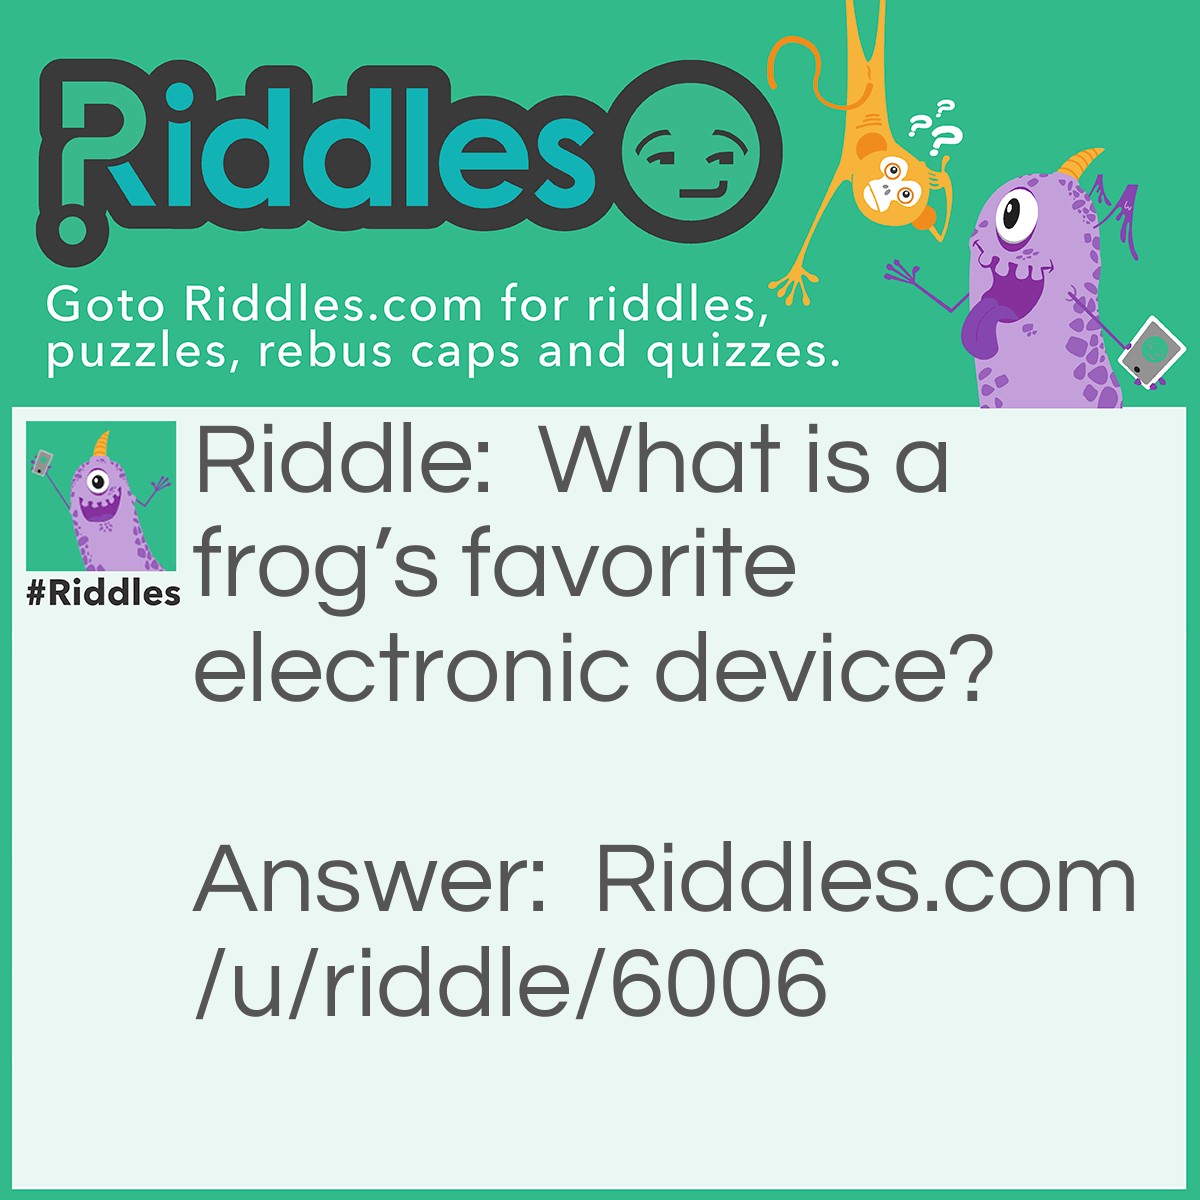 Riddle: What is a frog's favorite electronic device? Answer: An iPad.